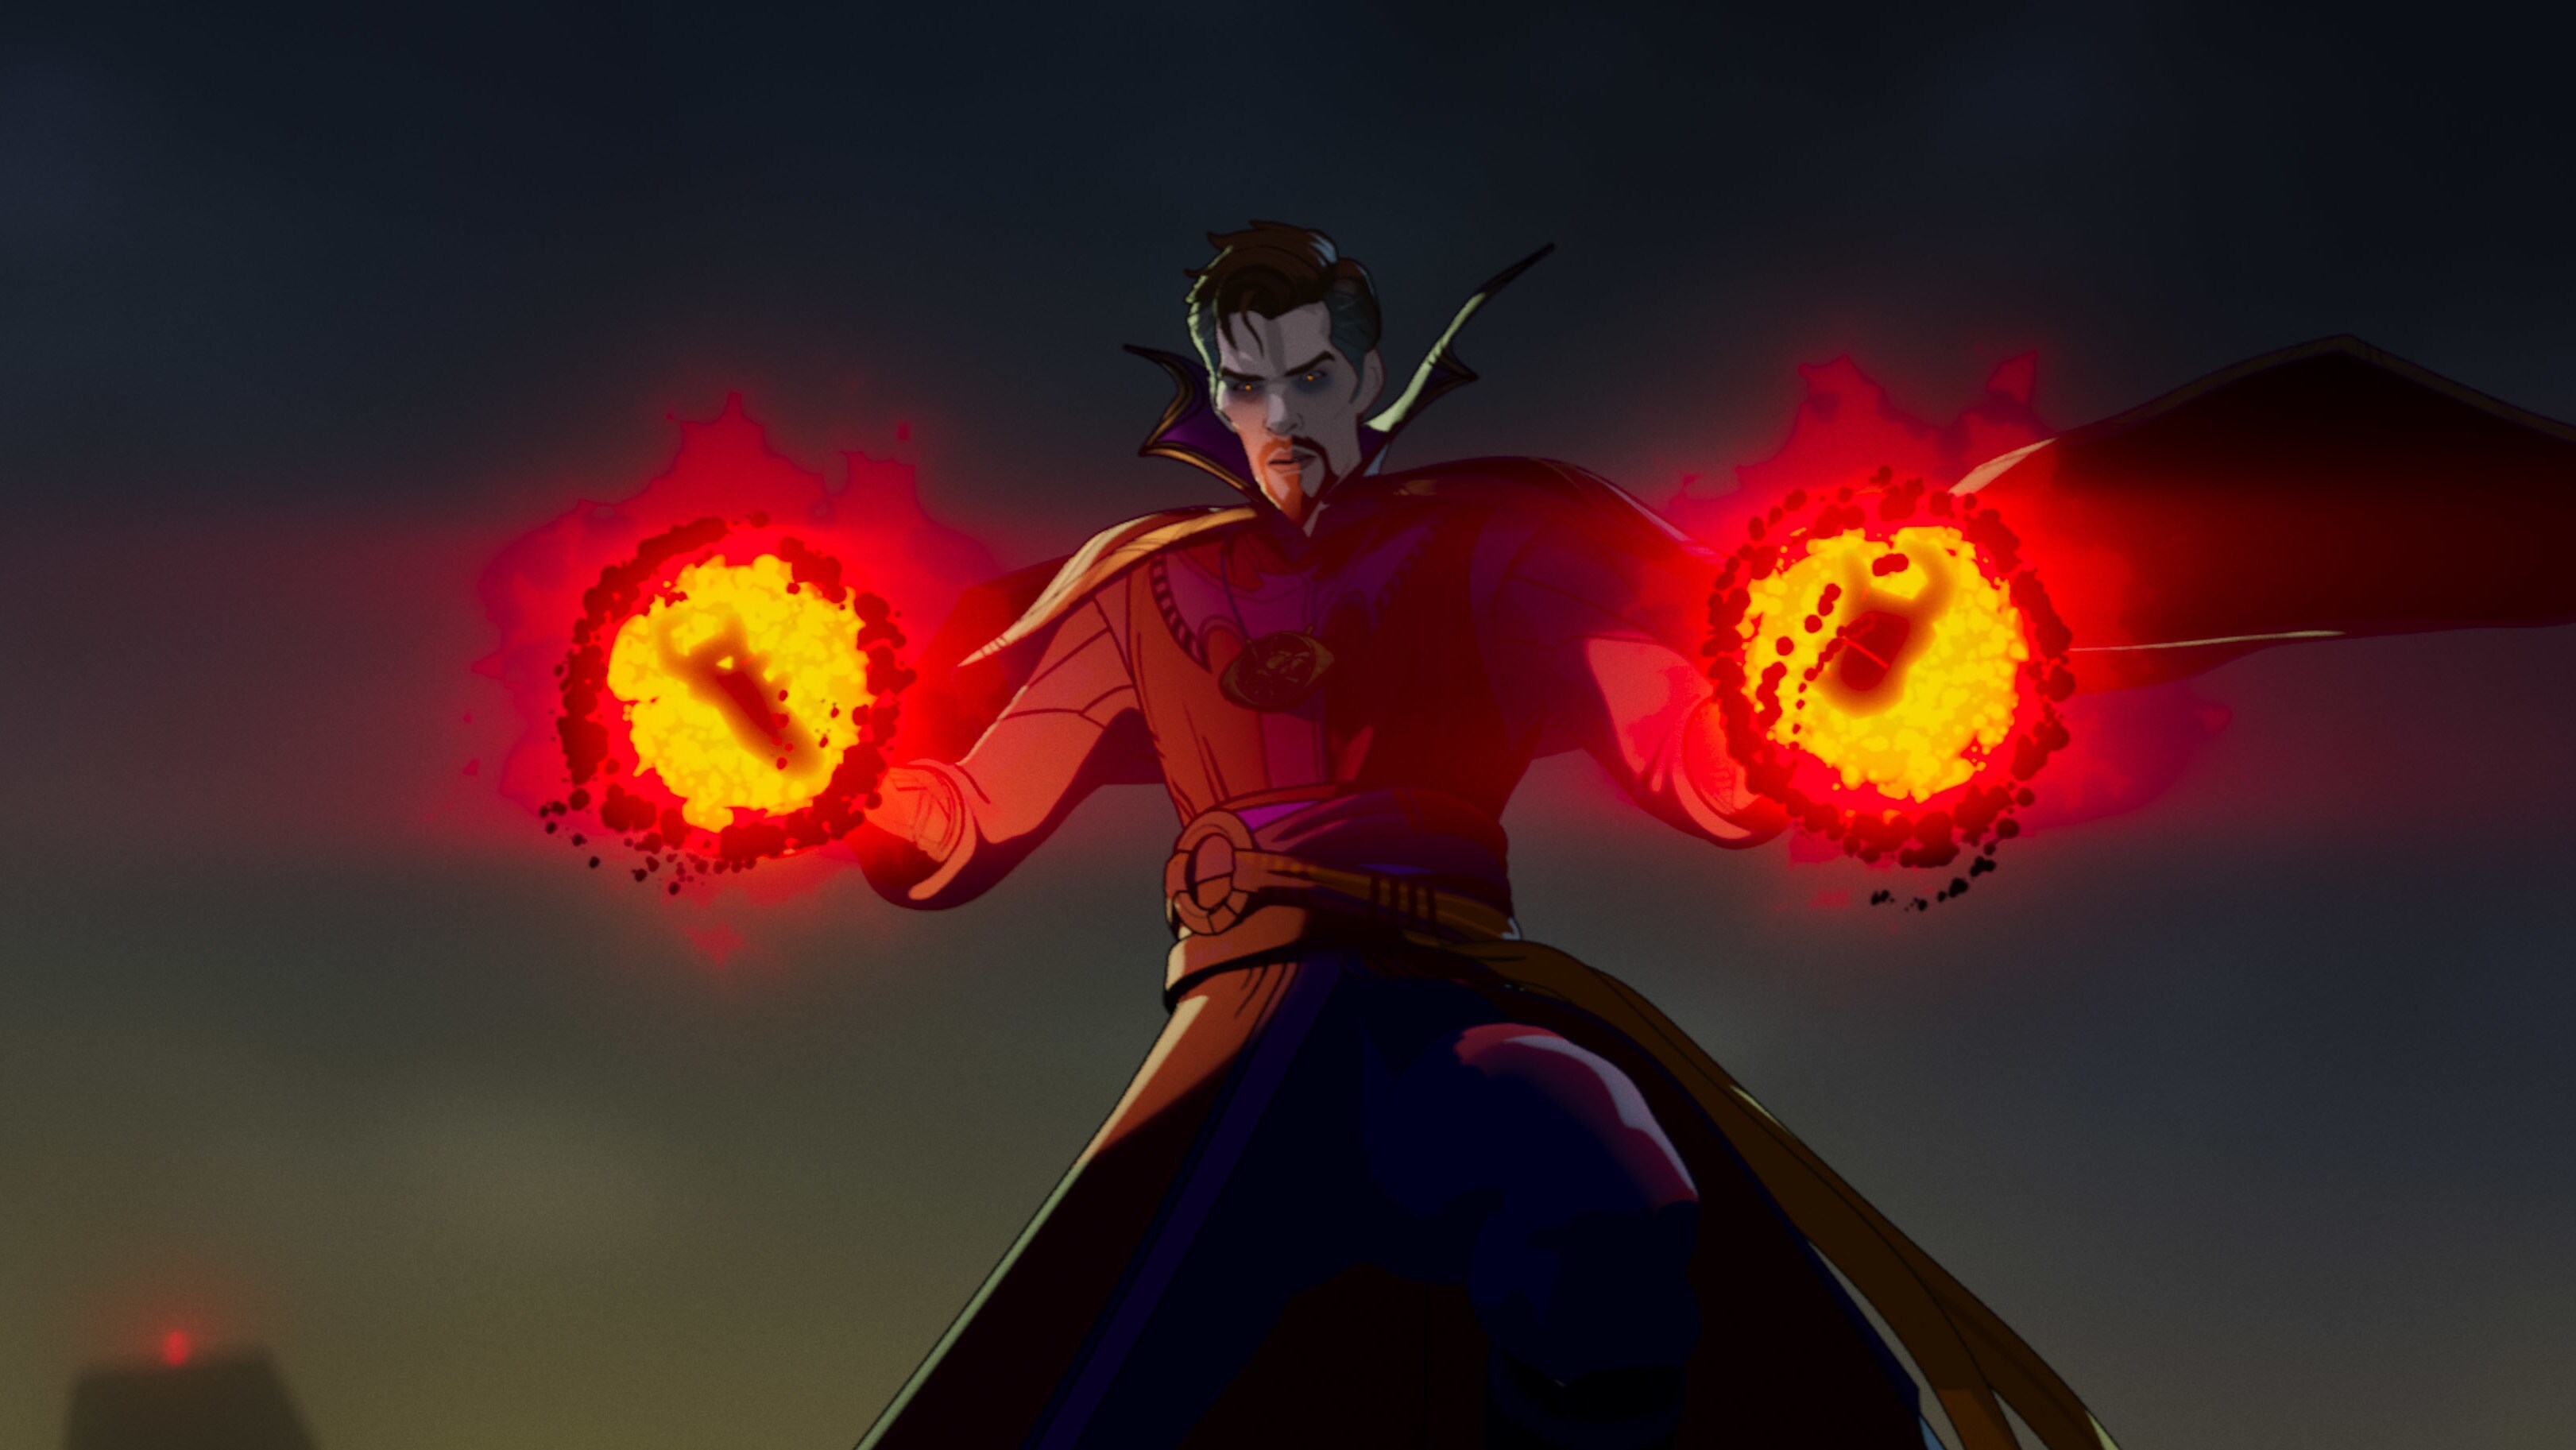 Doctor Strange Supreme in Marvel Studios' WHAT IF…? exclusively on Disney+. ©Marvel Studios 2021. All Rights Reserved.